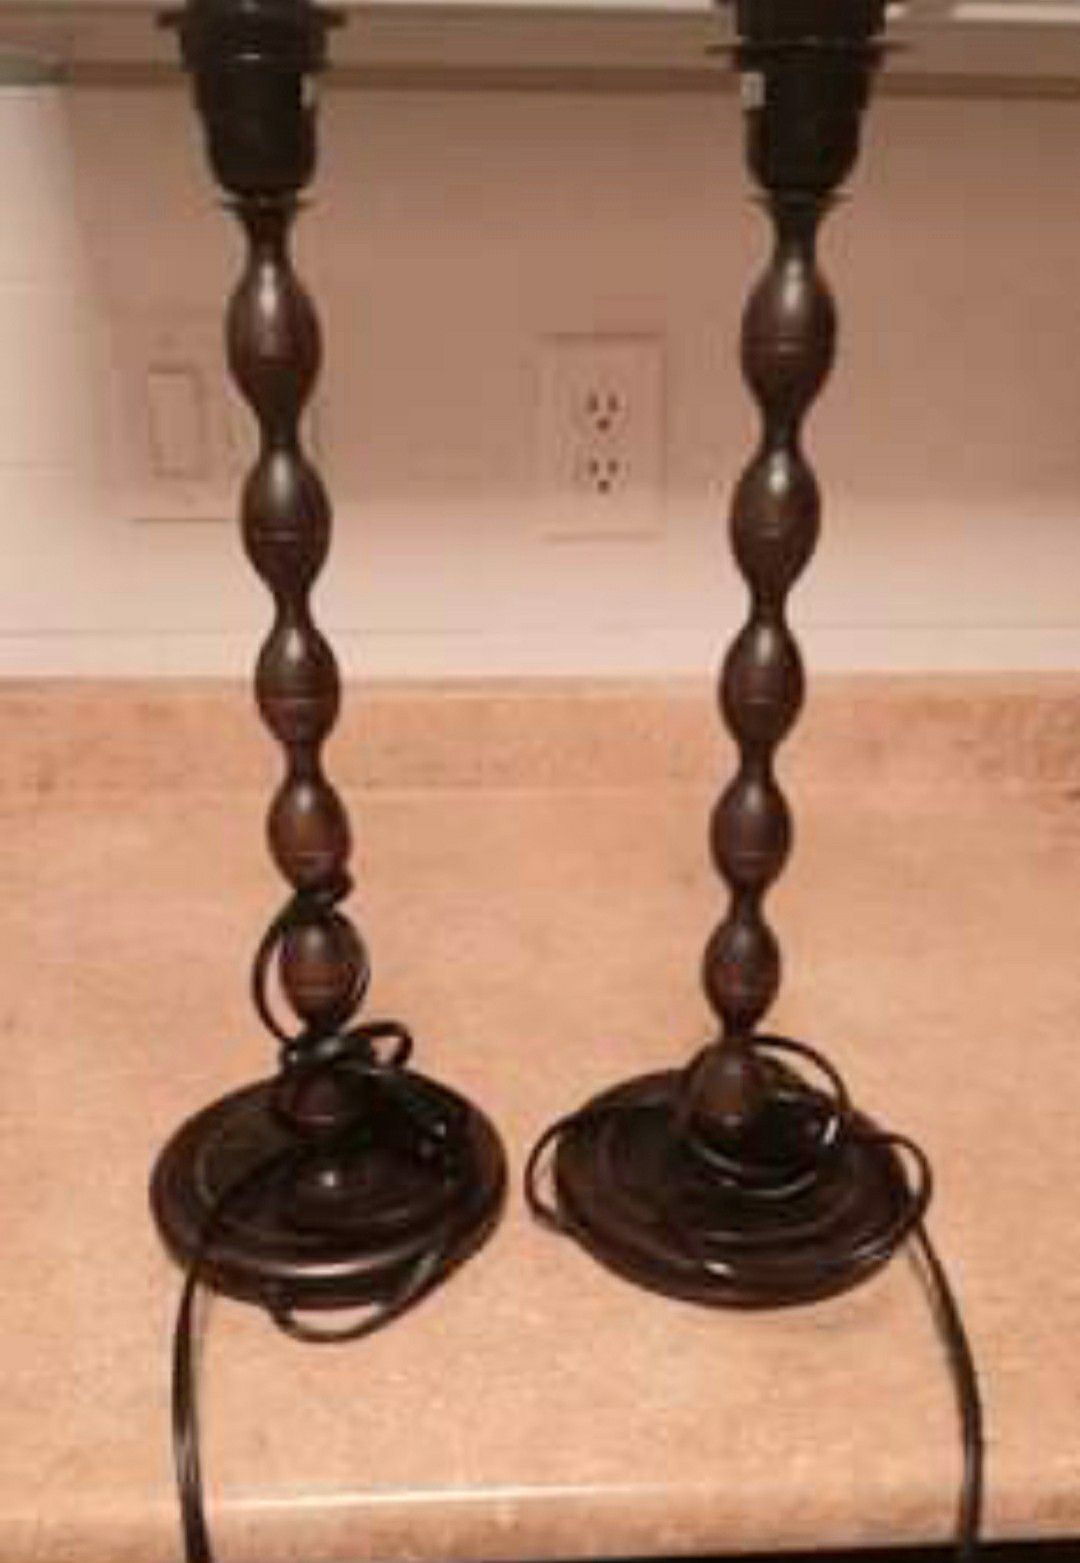 Two lamps in perfect condition